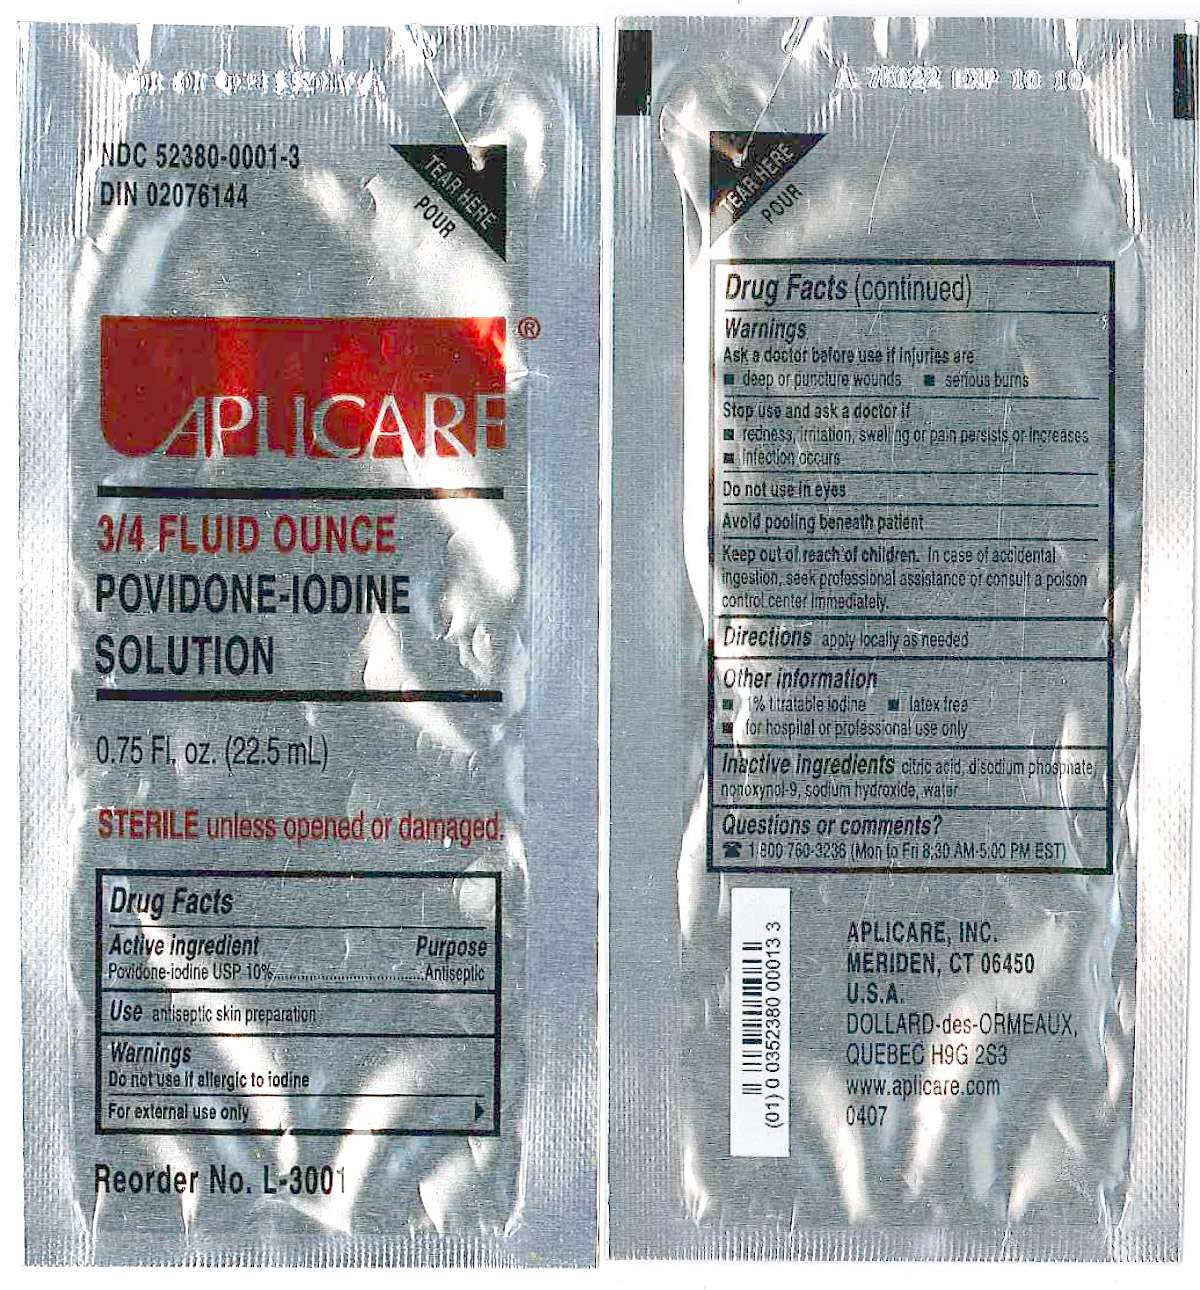 49641-25 SPINAL 25G WHITACRE